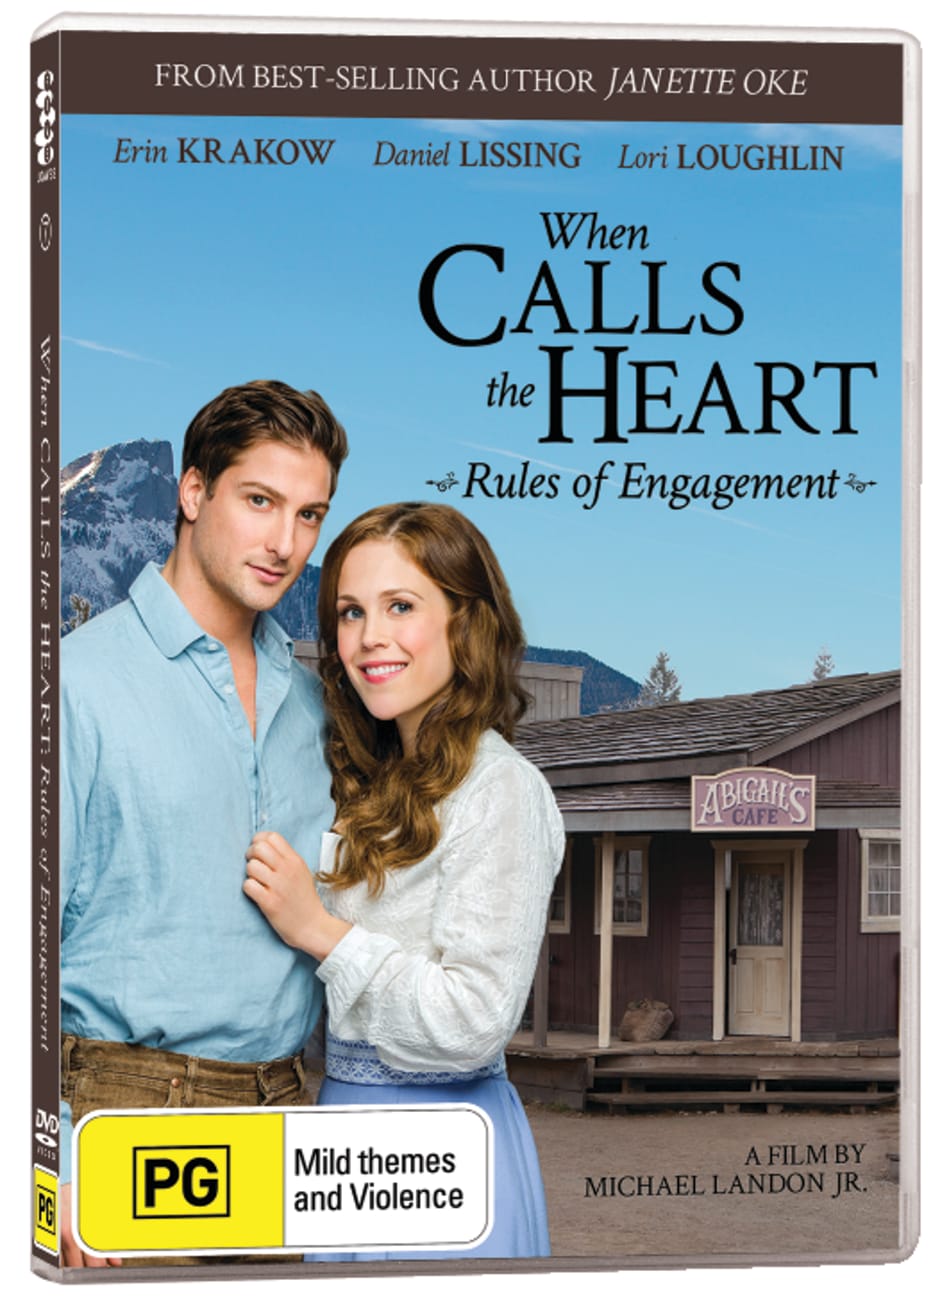 When Calls the Heart #07: Rules of Engagement DVD